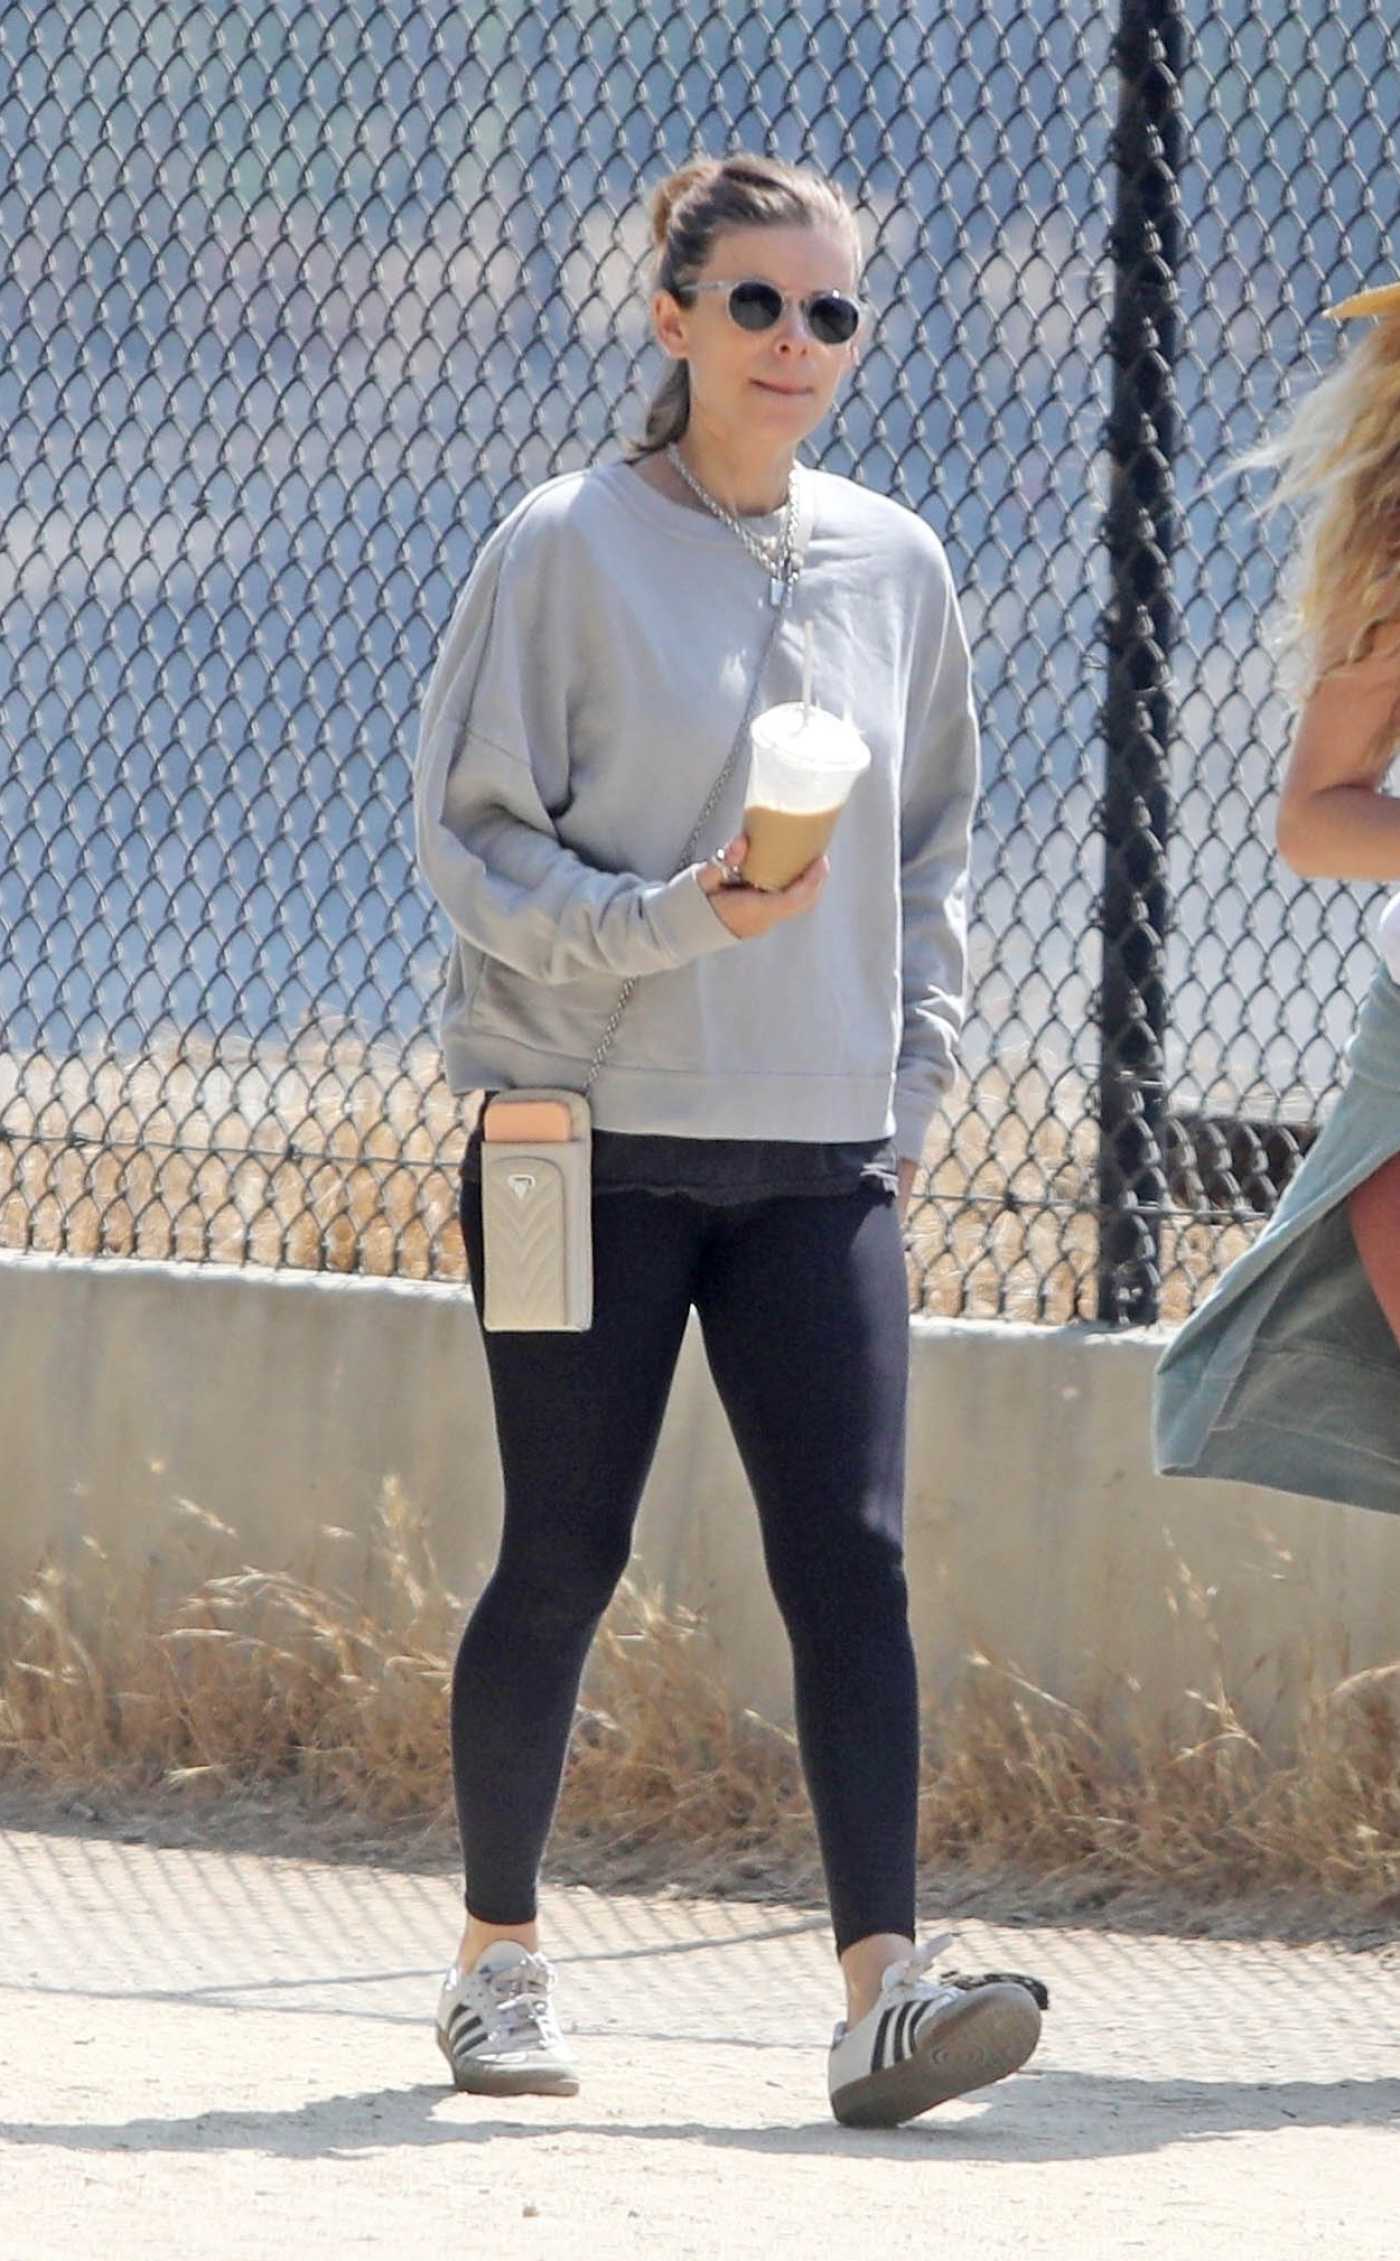 Kate Mara in a Grey Sweatshirt Teams Up with a Gal Pal for a Stroll Through Los Angeles 06/08/2022